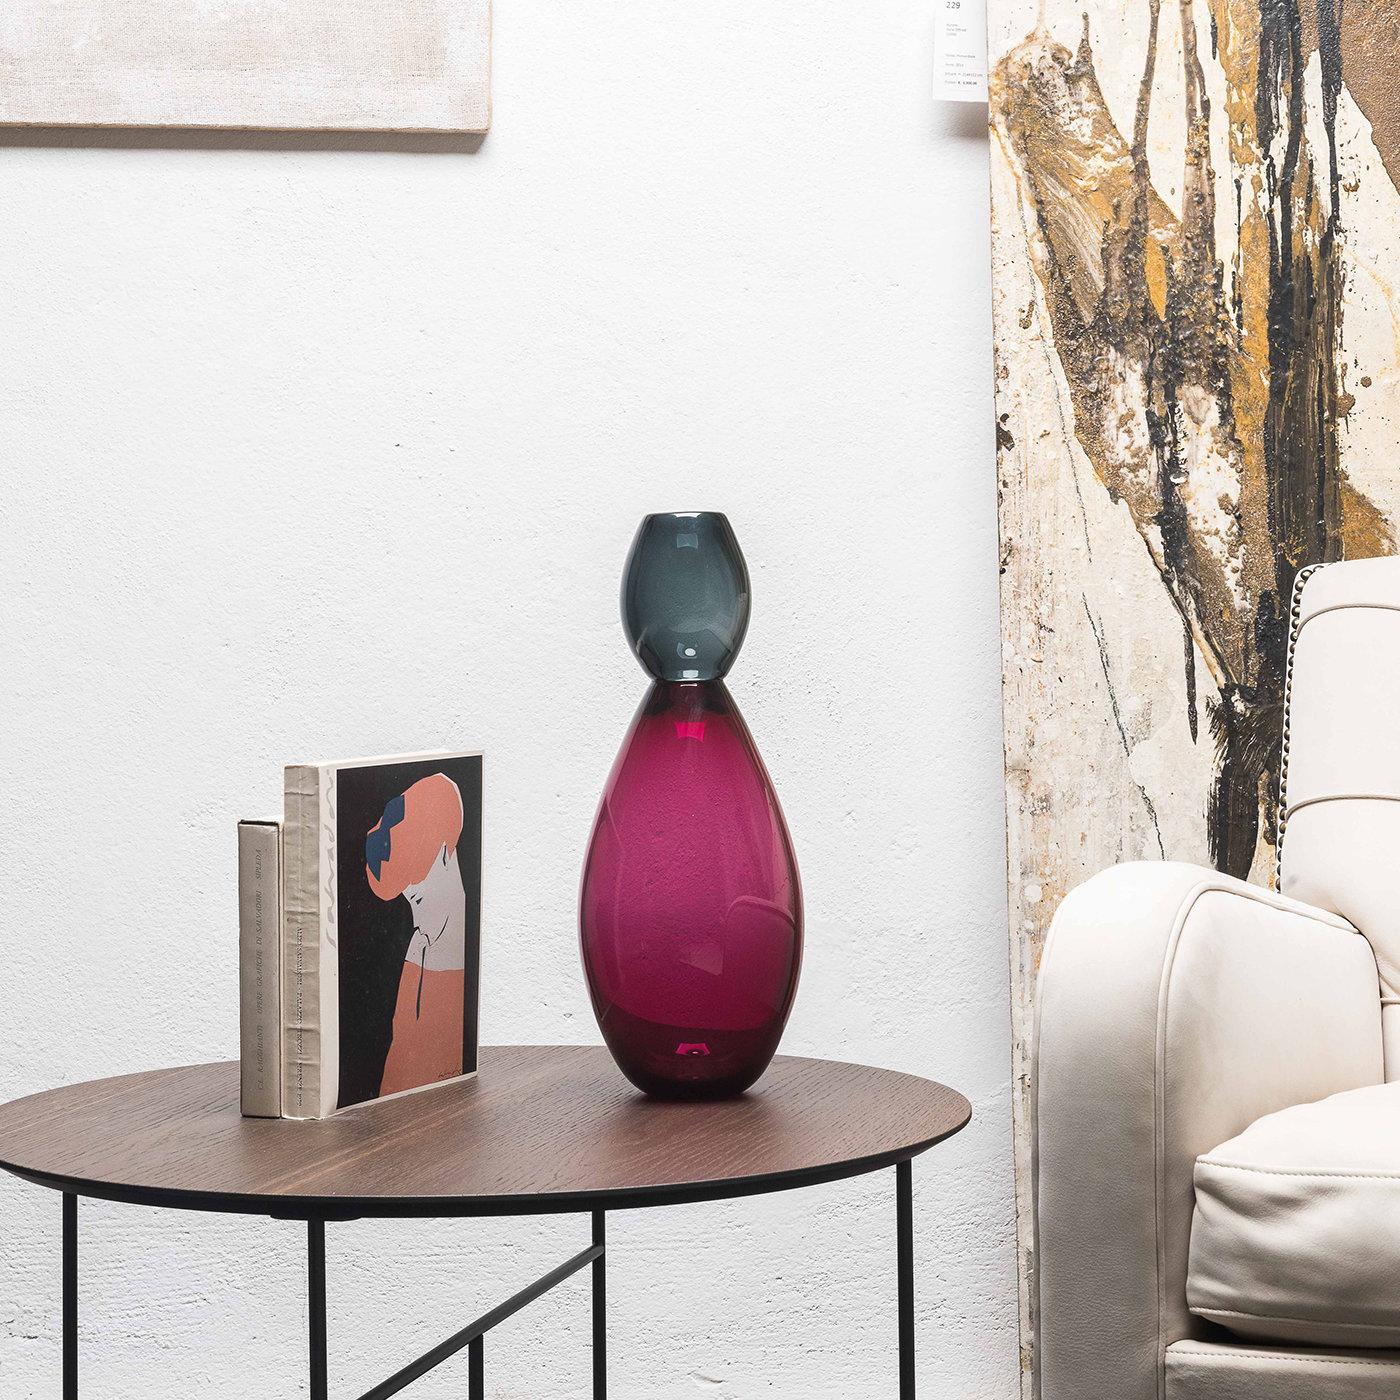 King designed by Karim Rashid is a curvaceous vase that combine regality with visual wit. Proposed in combination with Queen, the ovoid “crown” of King extends upward endowing the vase with a distinct character. Conceived to contain one flower for a